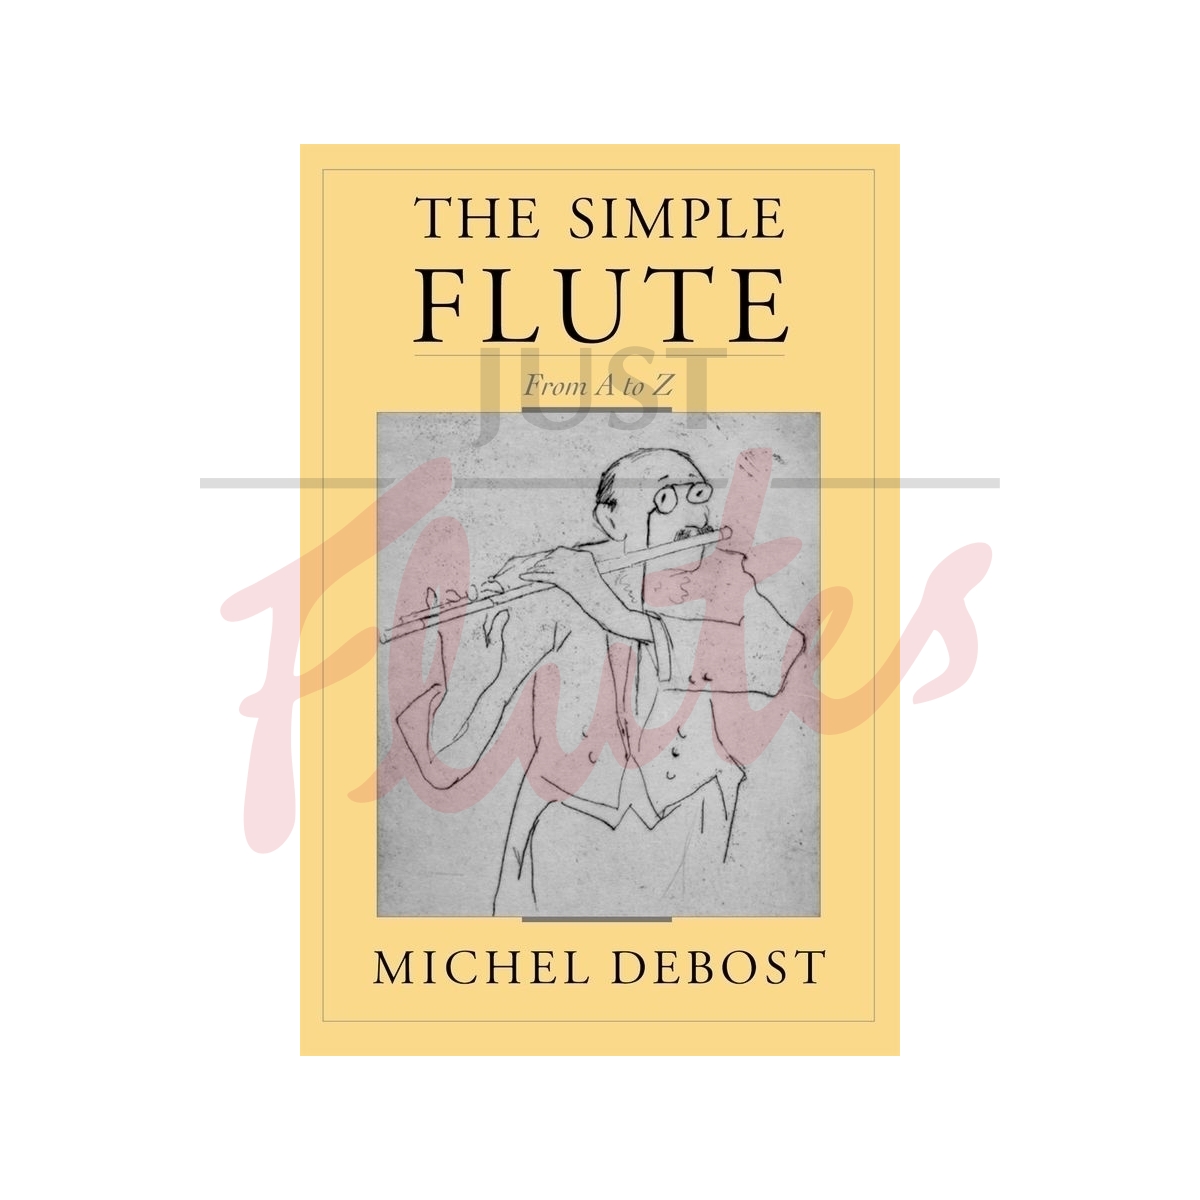 The Simple Flute from A to Z [Hardback]